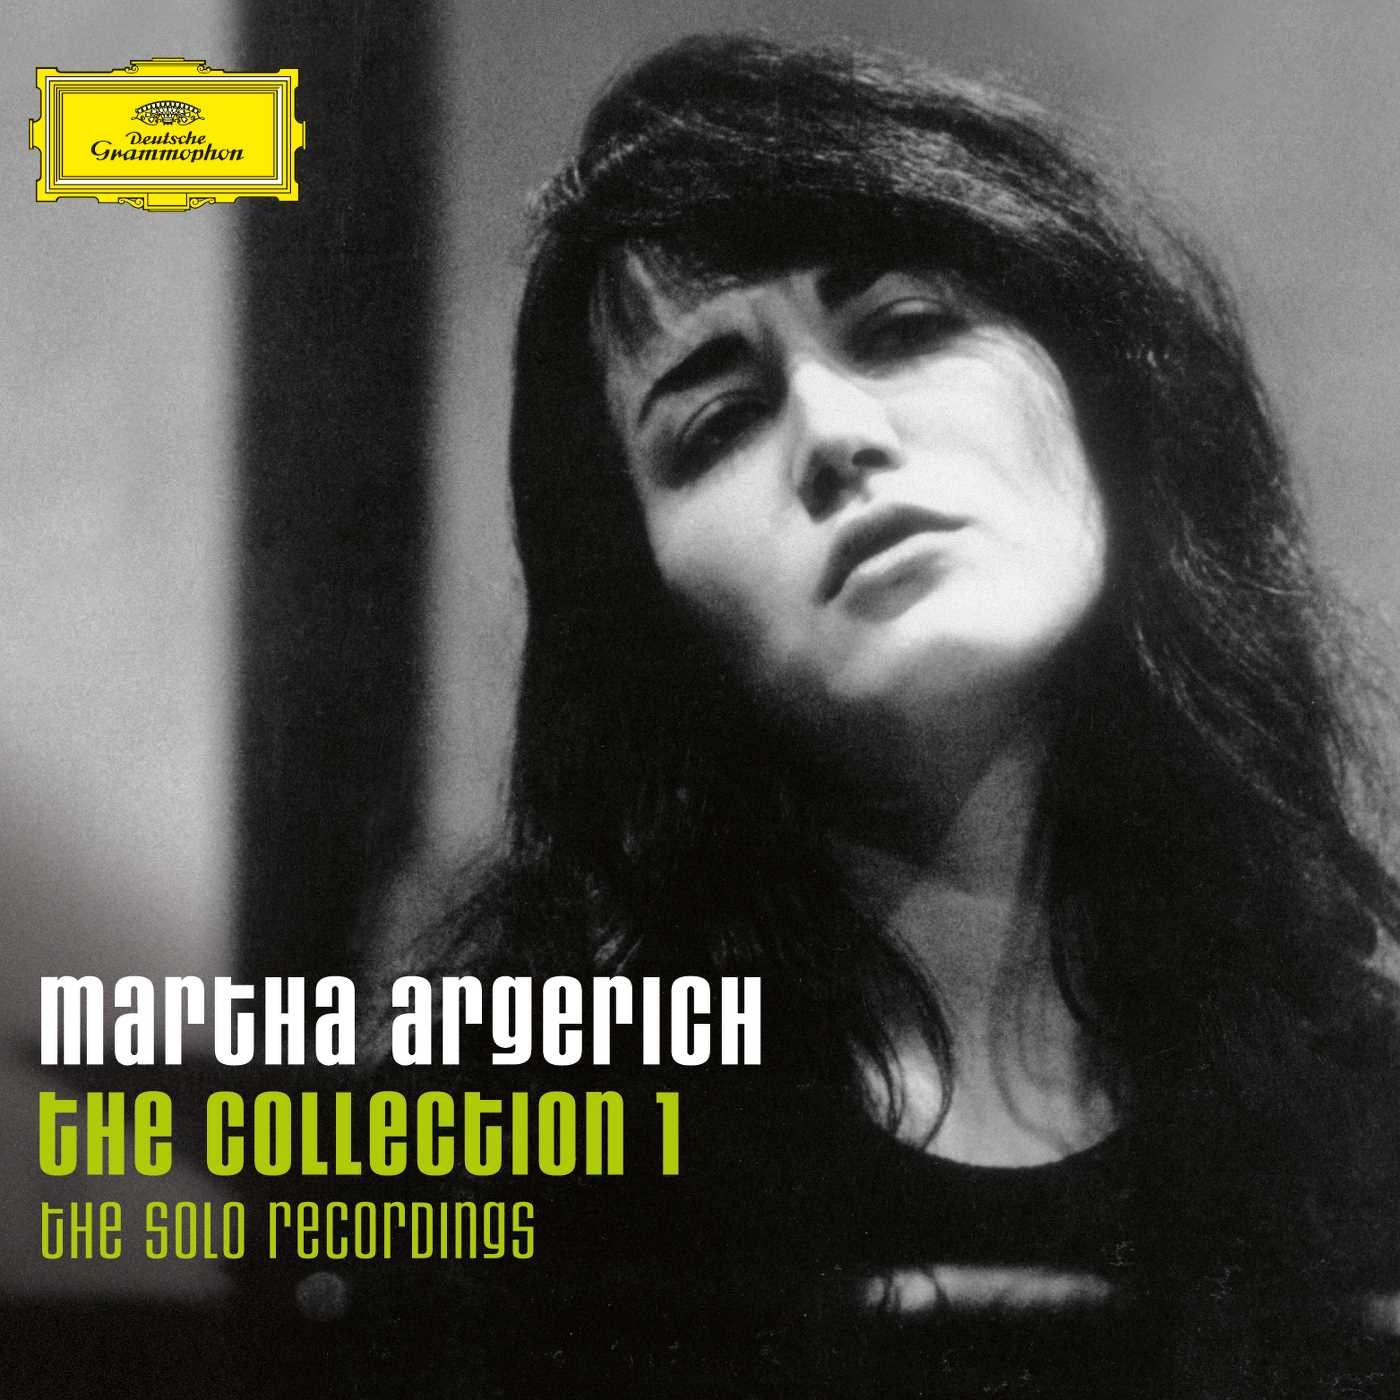 Martha Argerich The Collection 1 The Solo Recordings 2008 Flac Softarchive 1988